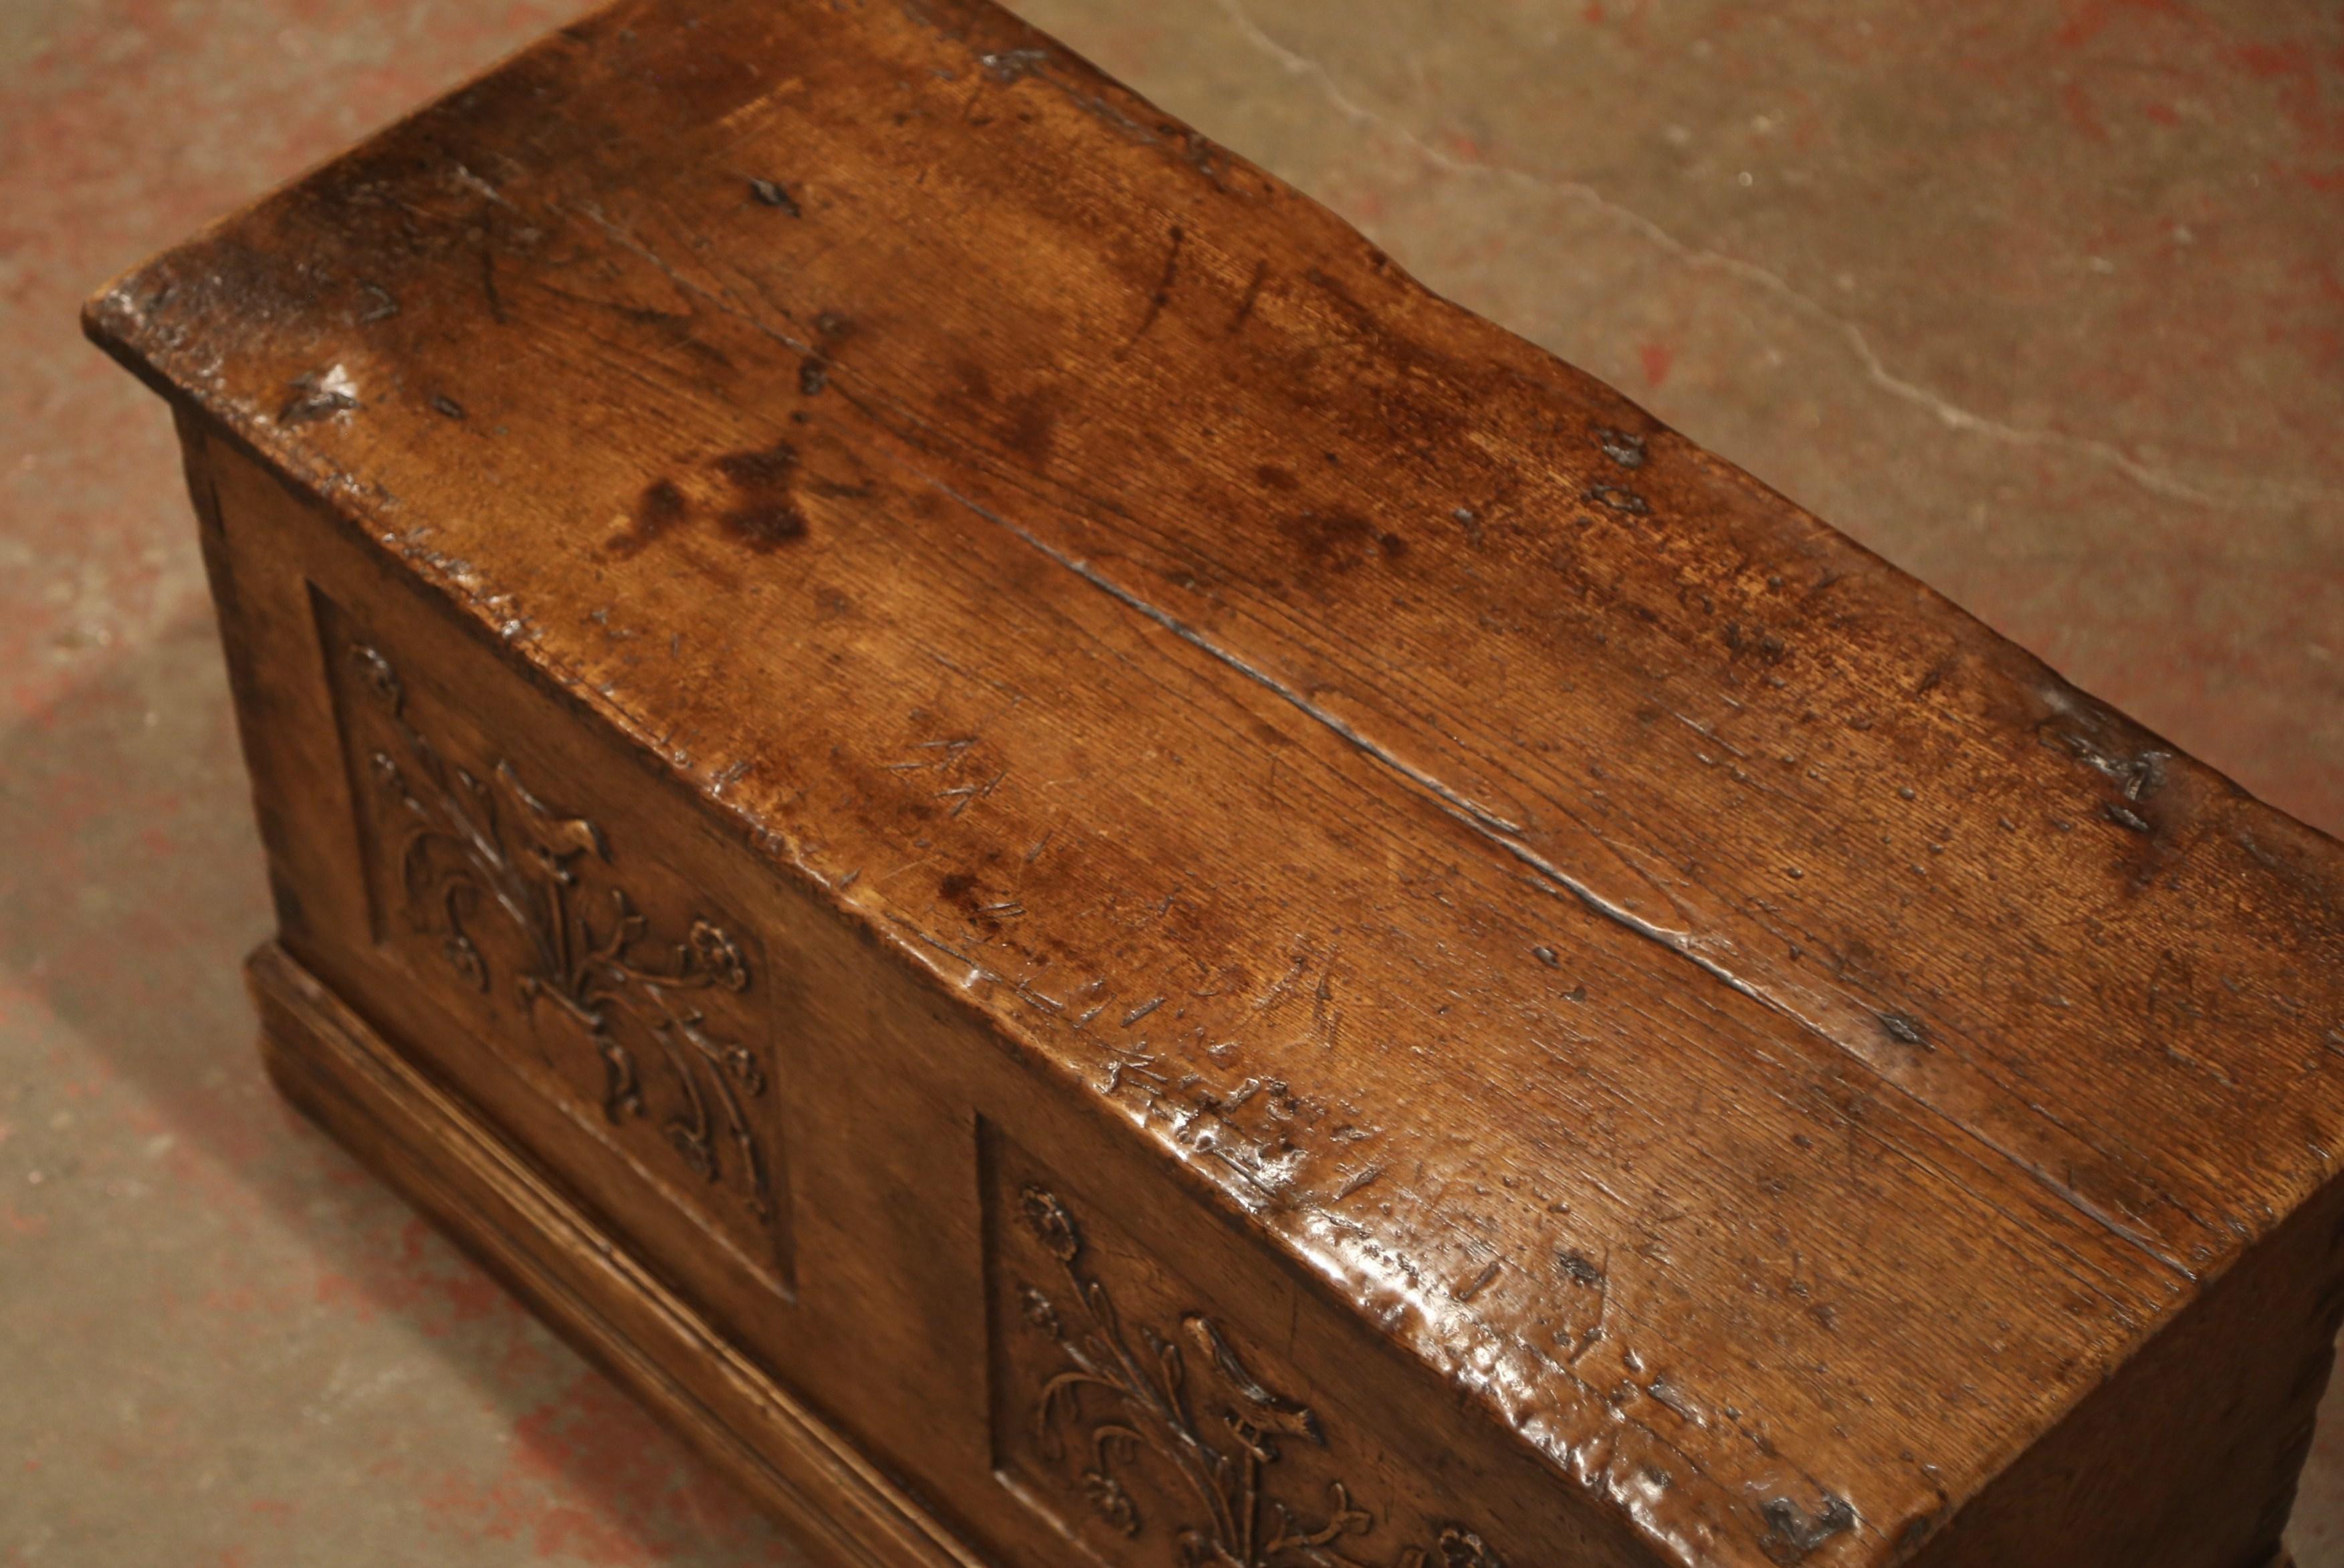 Hand-Carved 18th Century French Louis XIII Carved Chestnut Coffer Trunk from the Pyrenees